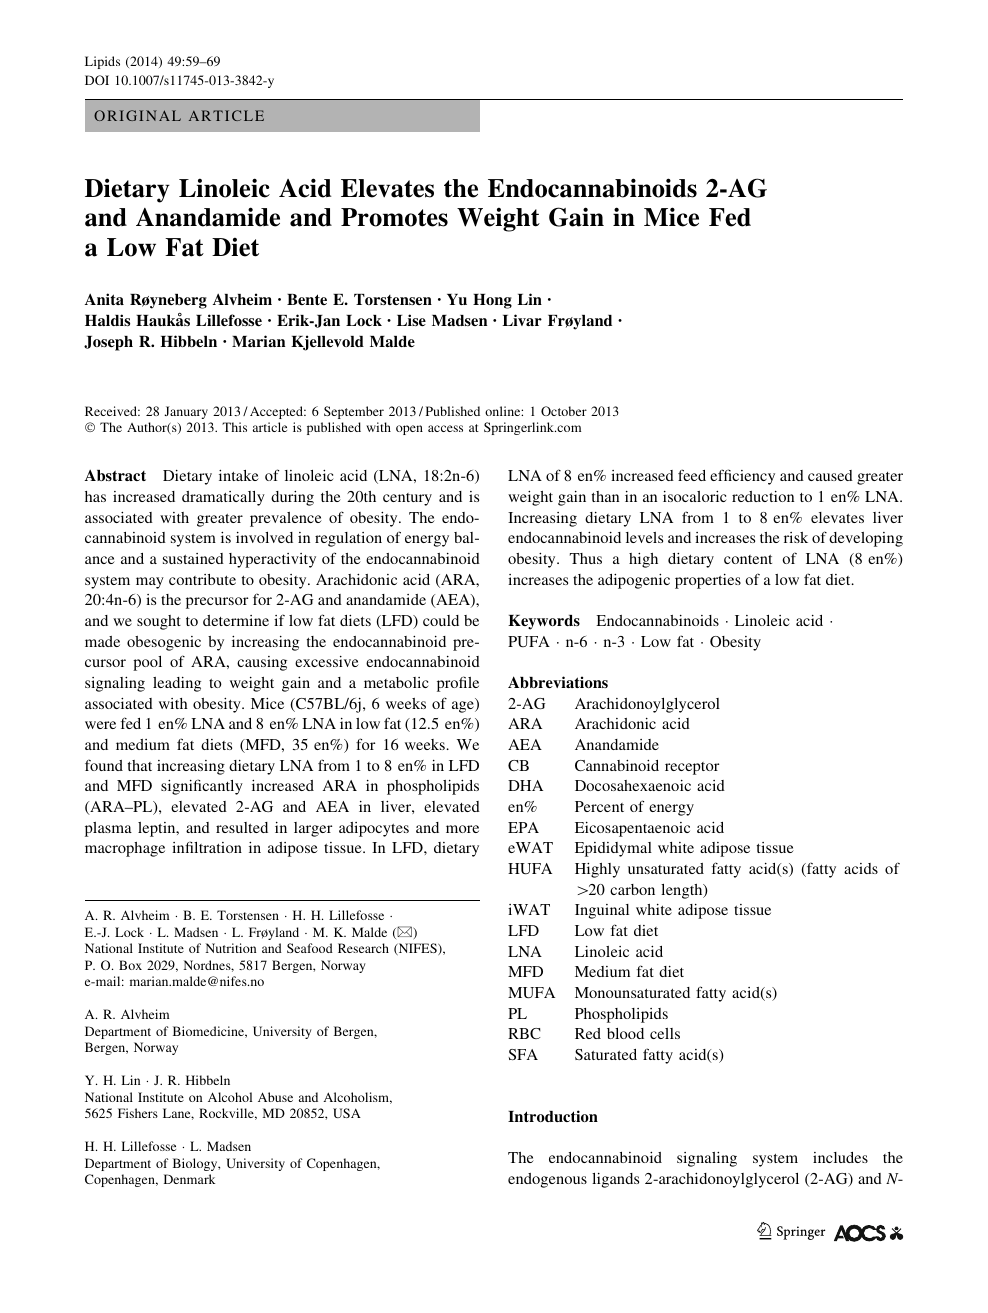 Dietary Linoleic Acid Elevates The Endocannabinoids 2 Ag And Anandamide And Promotes Weight Gain In Mice Fed A Low Fat Diet Topic Of Research Paper In Biological Sciences Download Scholarly Article Pdf